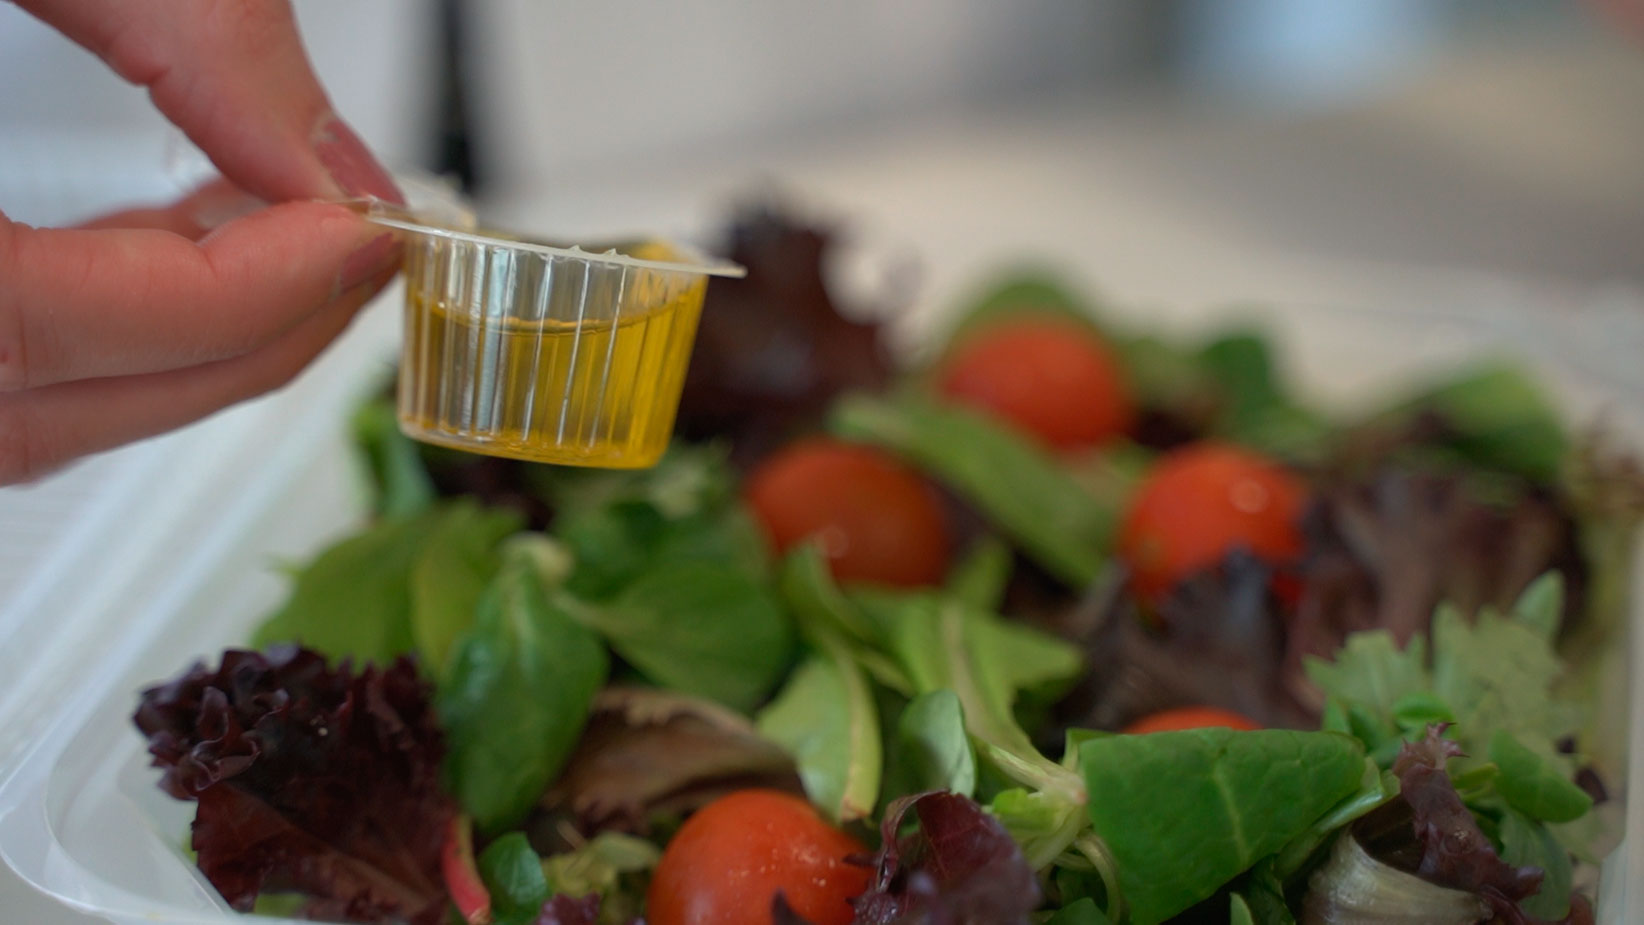 100% compostable single-use packaging for extra virgin olive oil